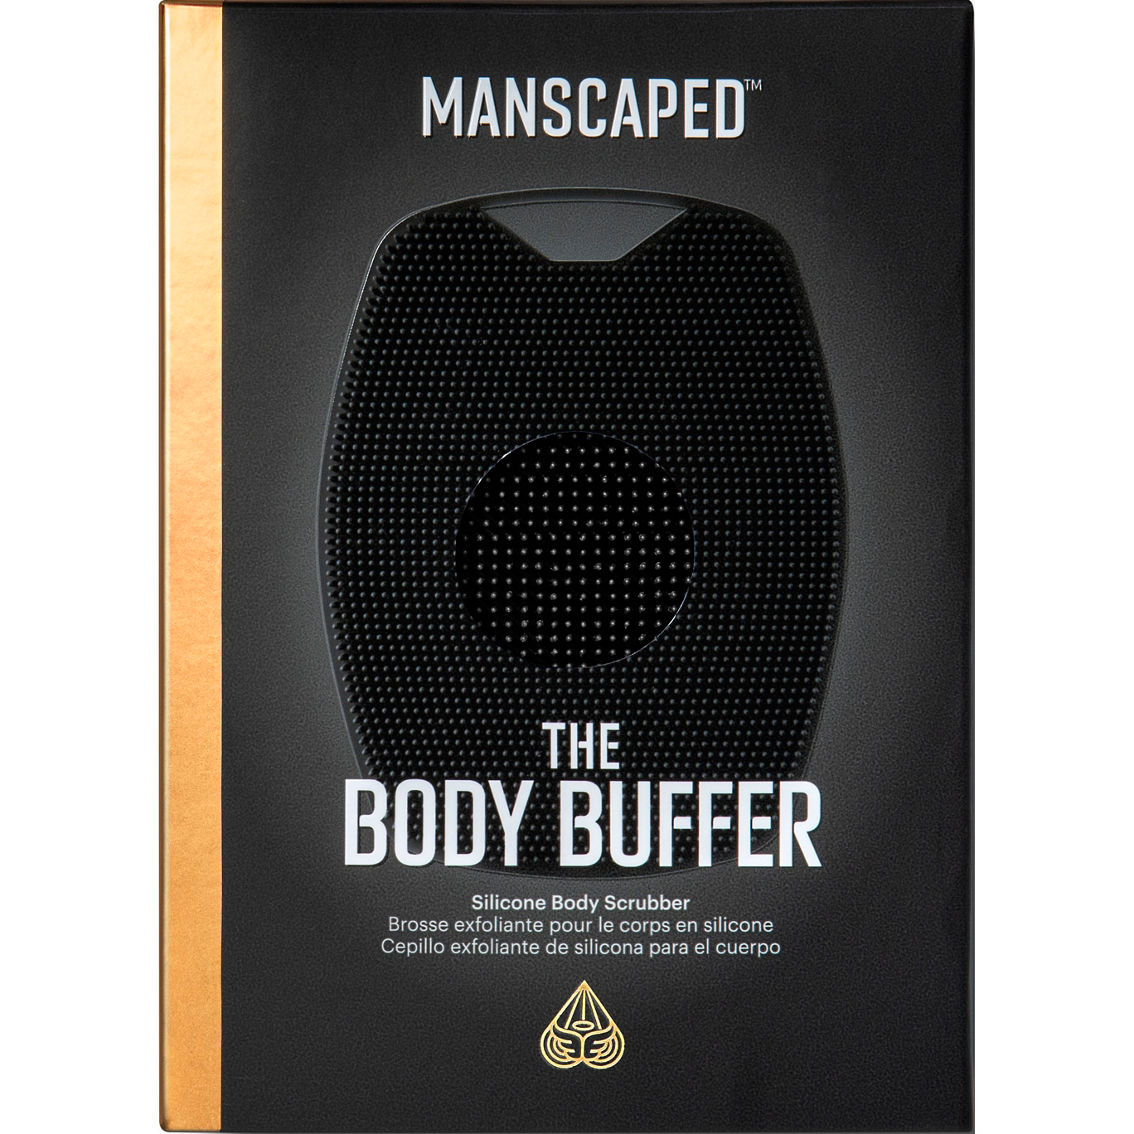 Manscaped The Body Buffer Silicone Body Scrubber